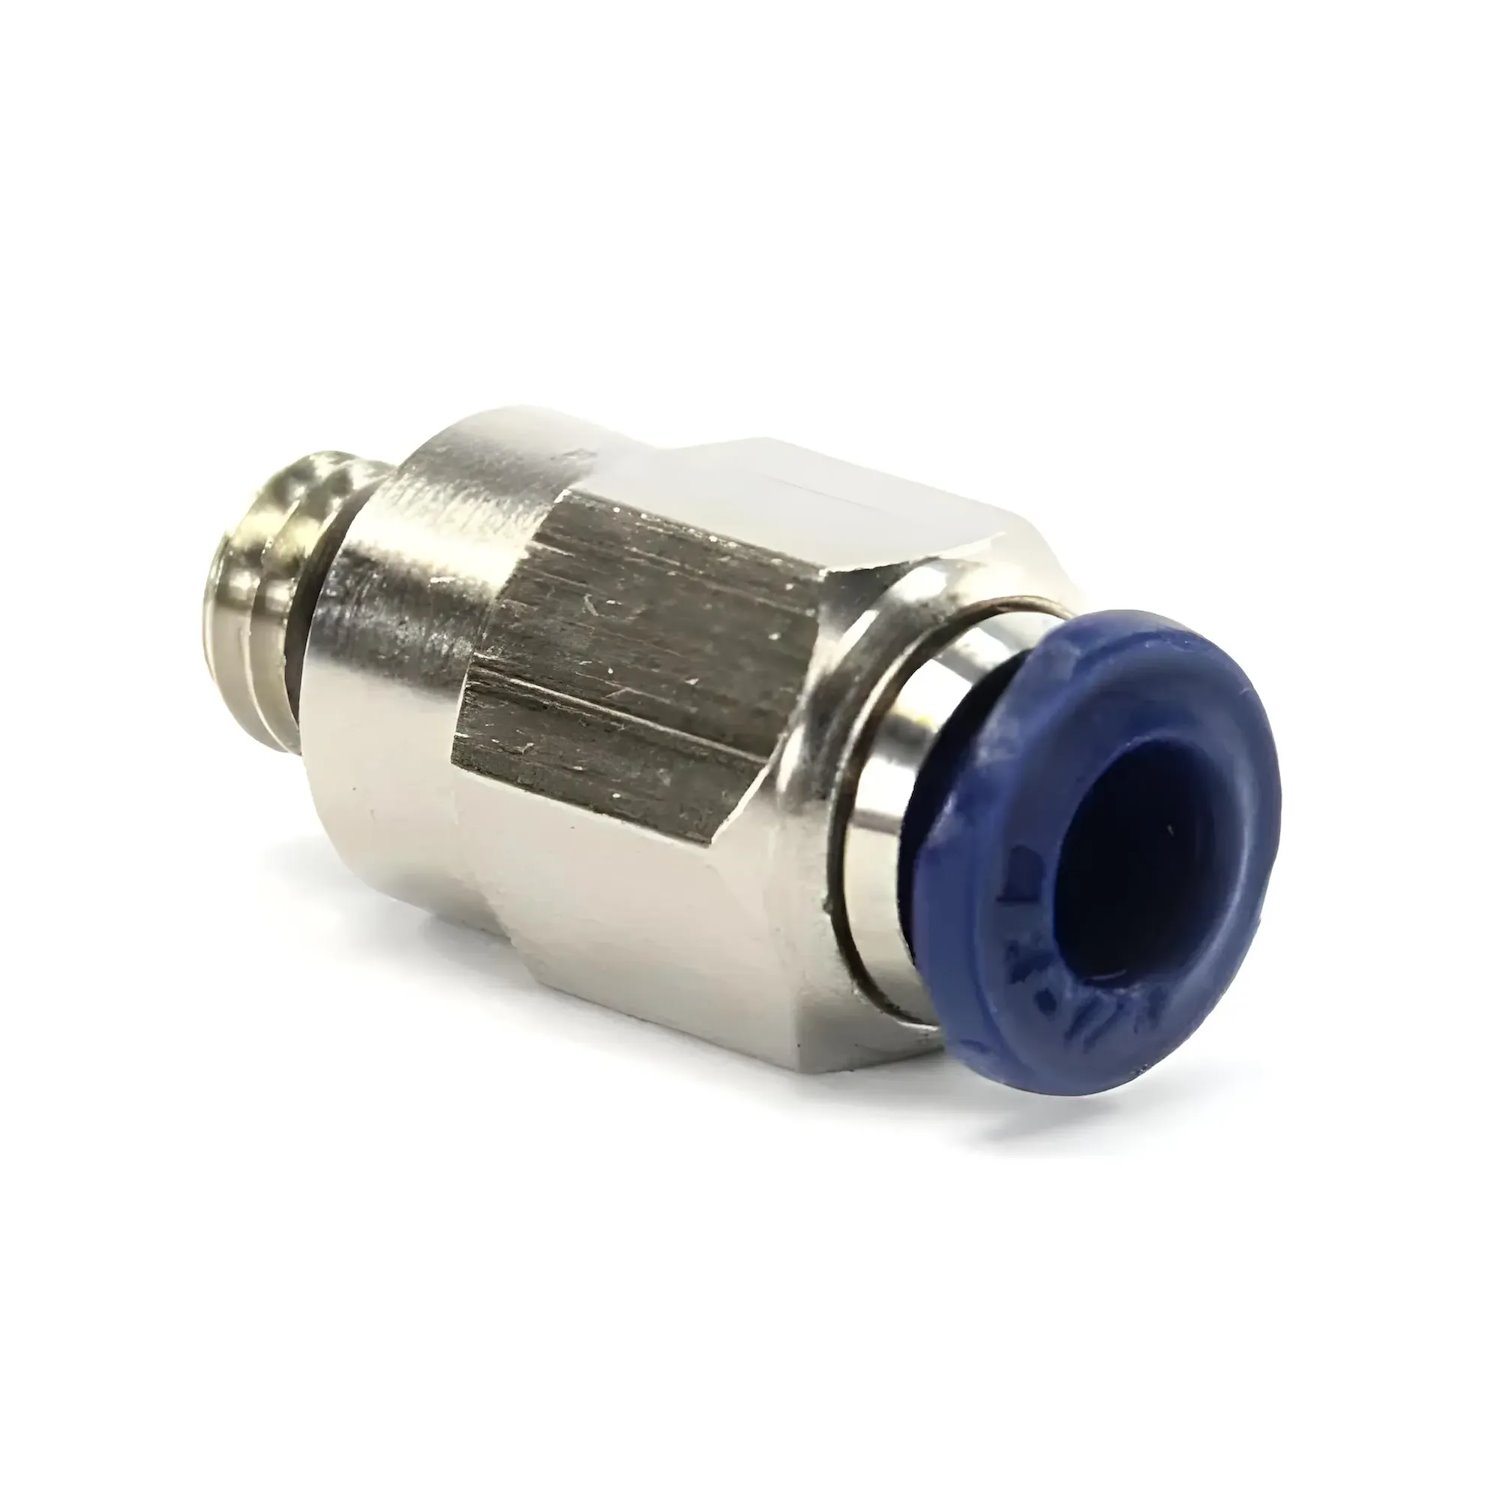 00-01560 1/8 in. Tube x #10-32 Male UNF Push-to-Connect Fitting, Nickel Plated Brass